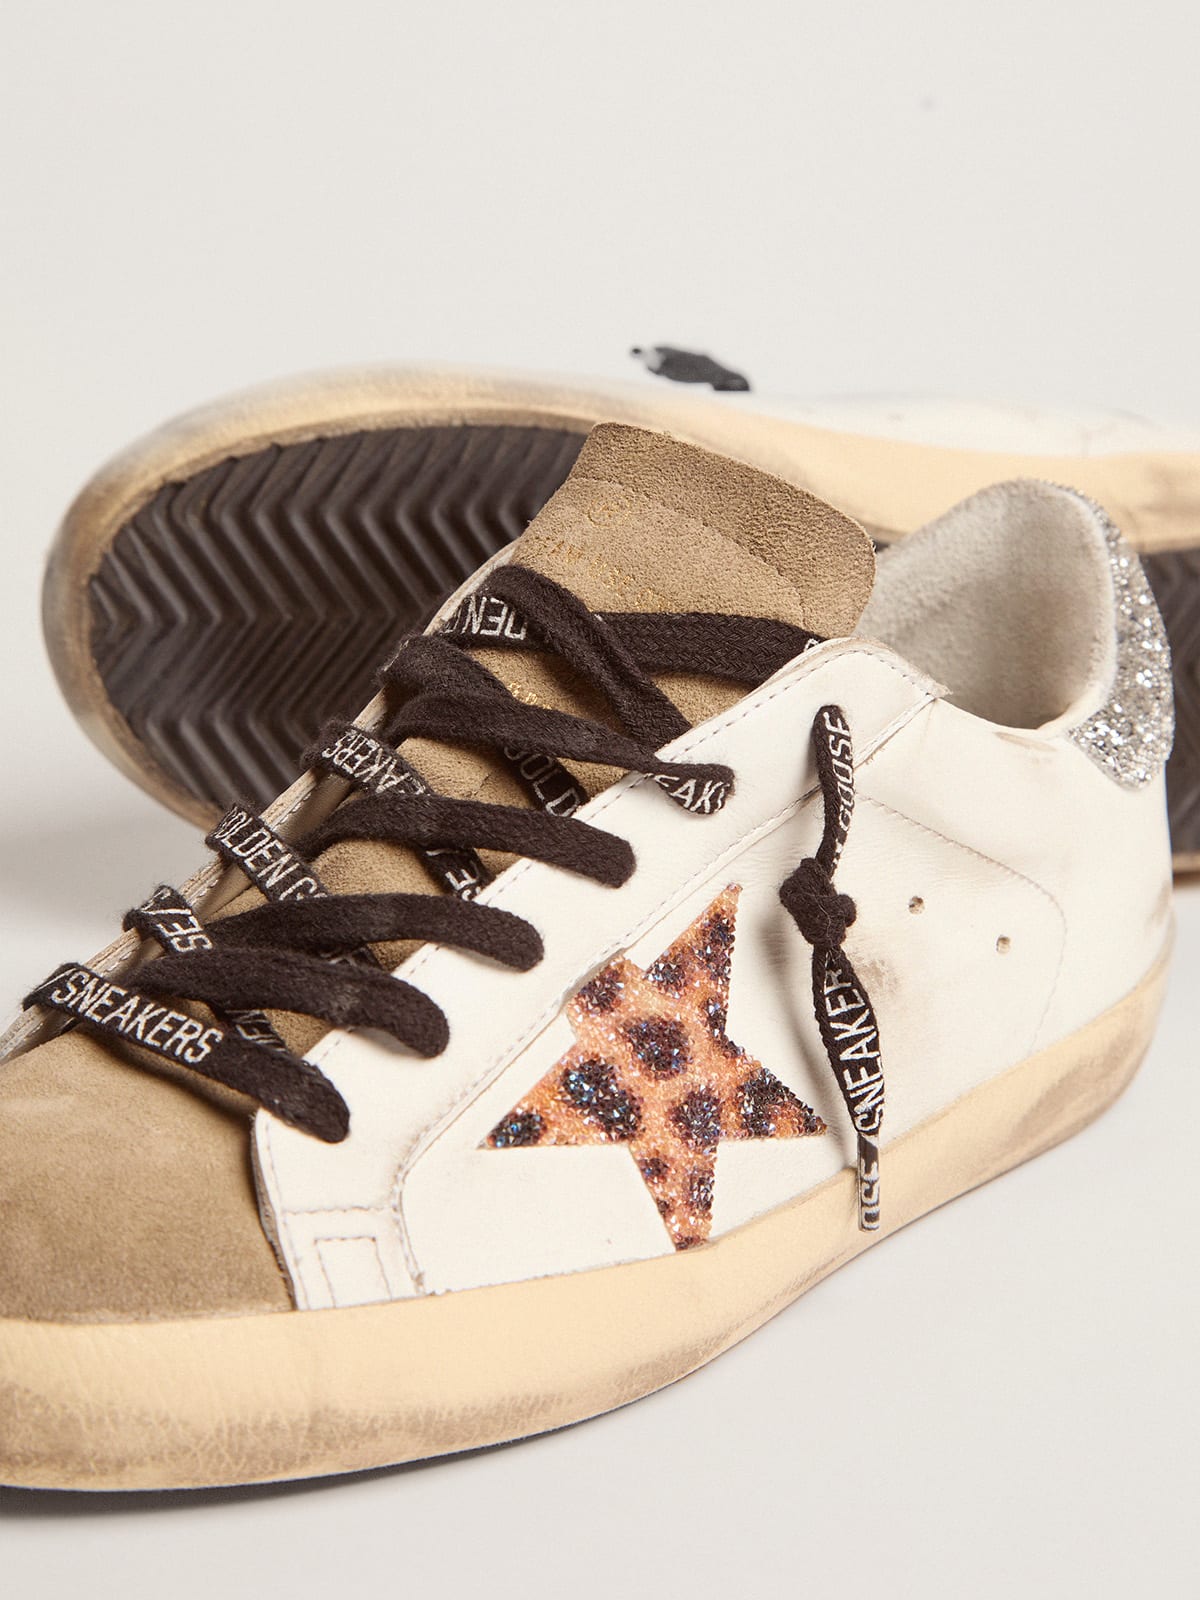 Golden Goose - Women's Super-Star LTD with leopard print and crystal star in 